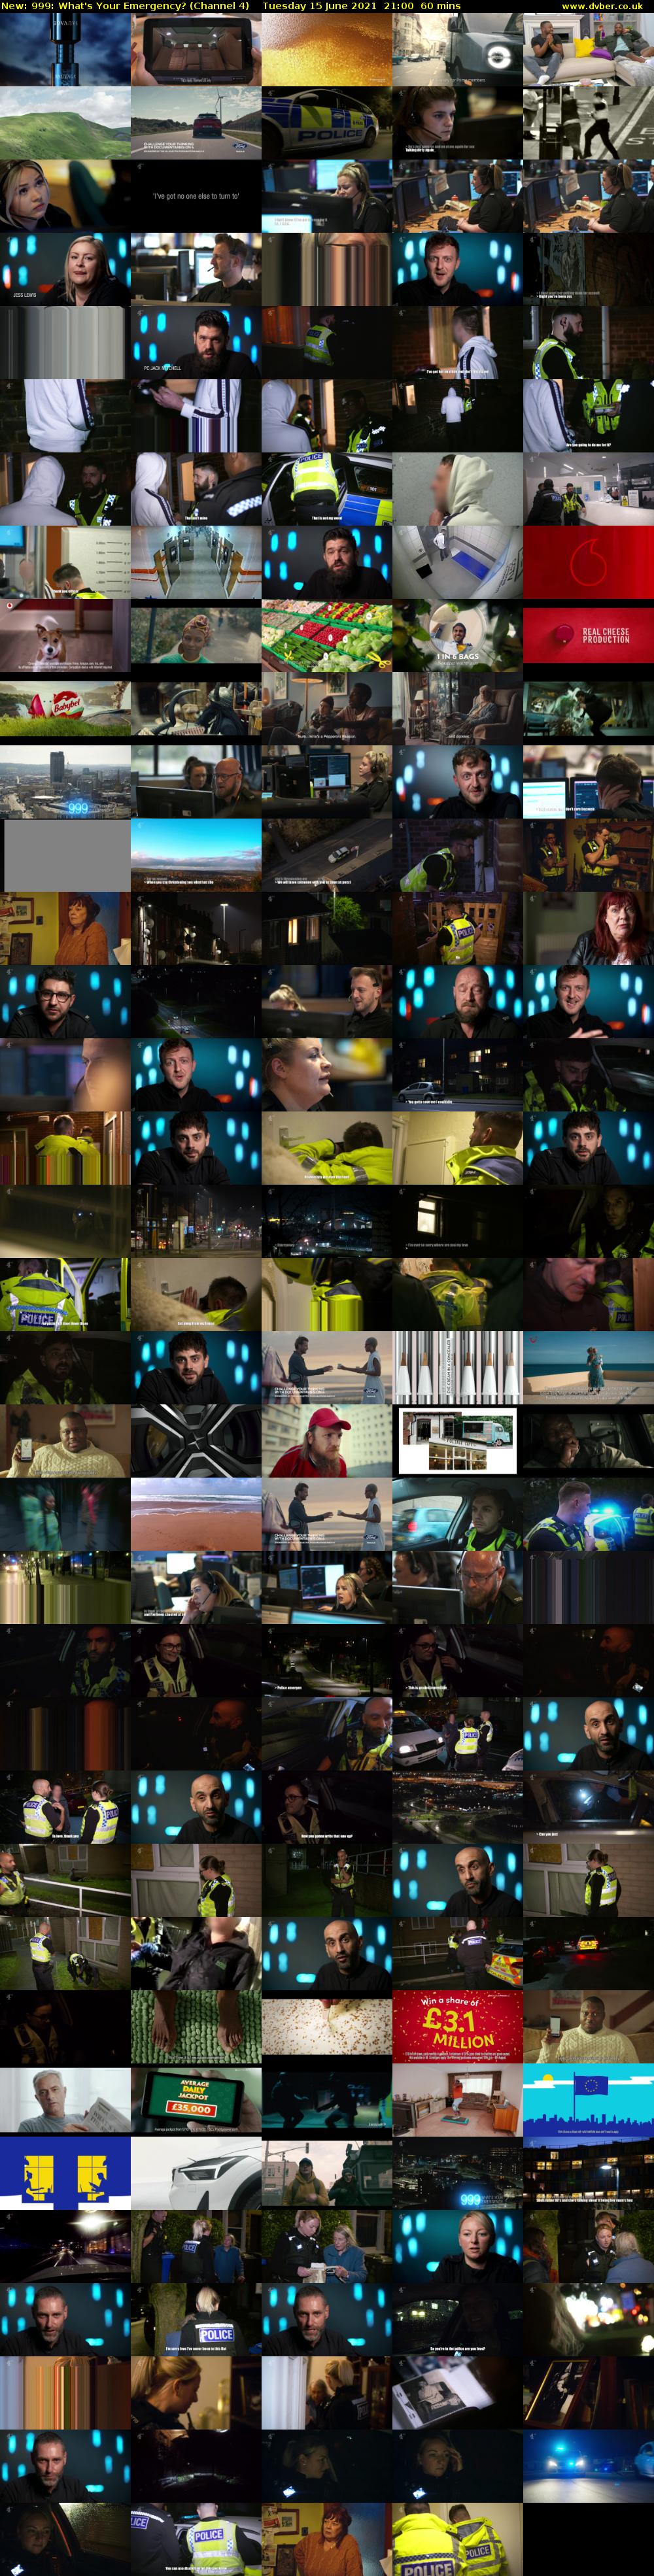 999: What's Your Emergency? (Channel 4) Tuesday 15 June 2021 21:00 - 22:00